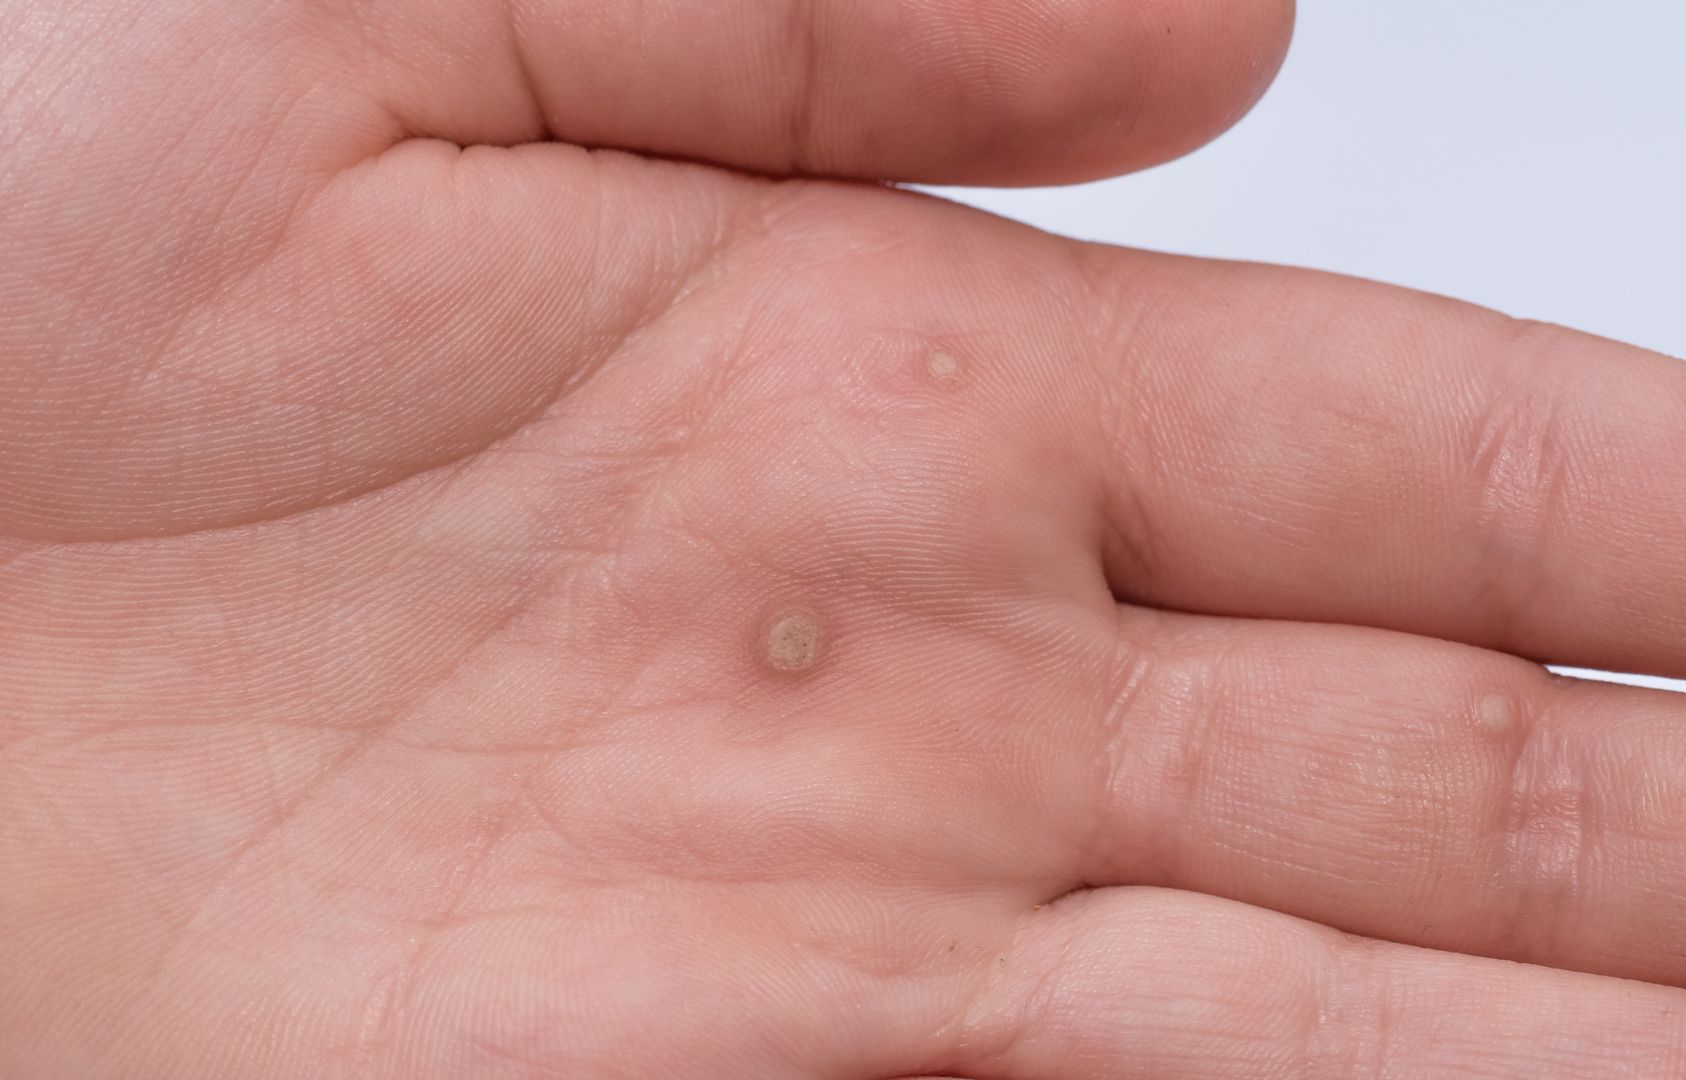 Warts on your hands